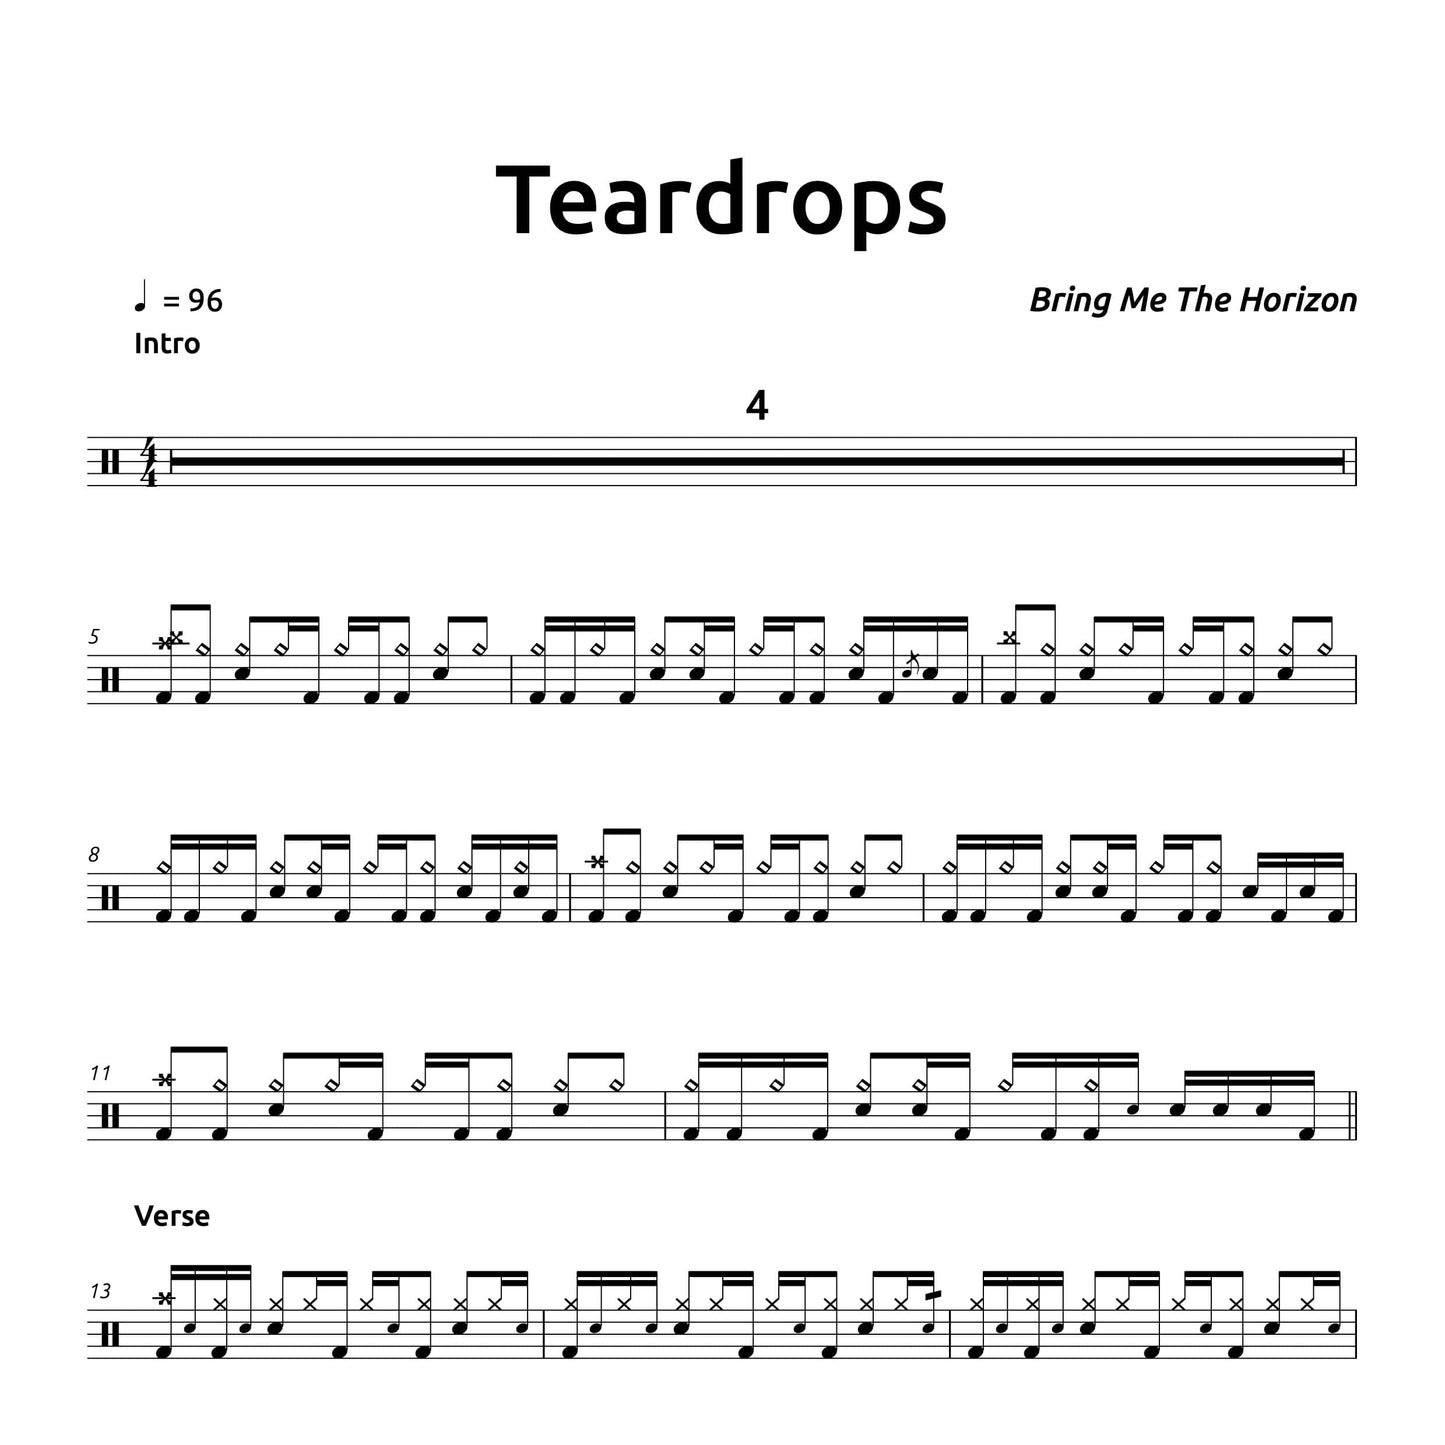 Bring Me The Horizon - Doomed - Sheet Music For Drums